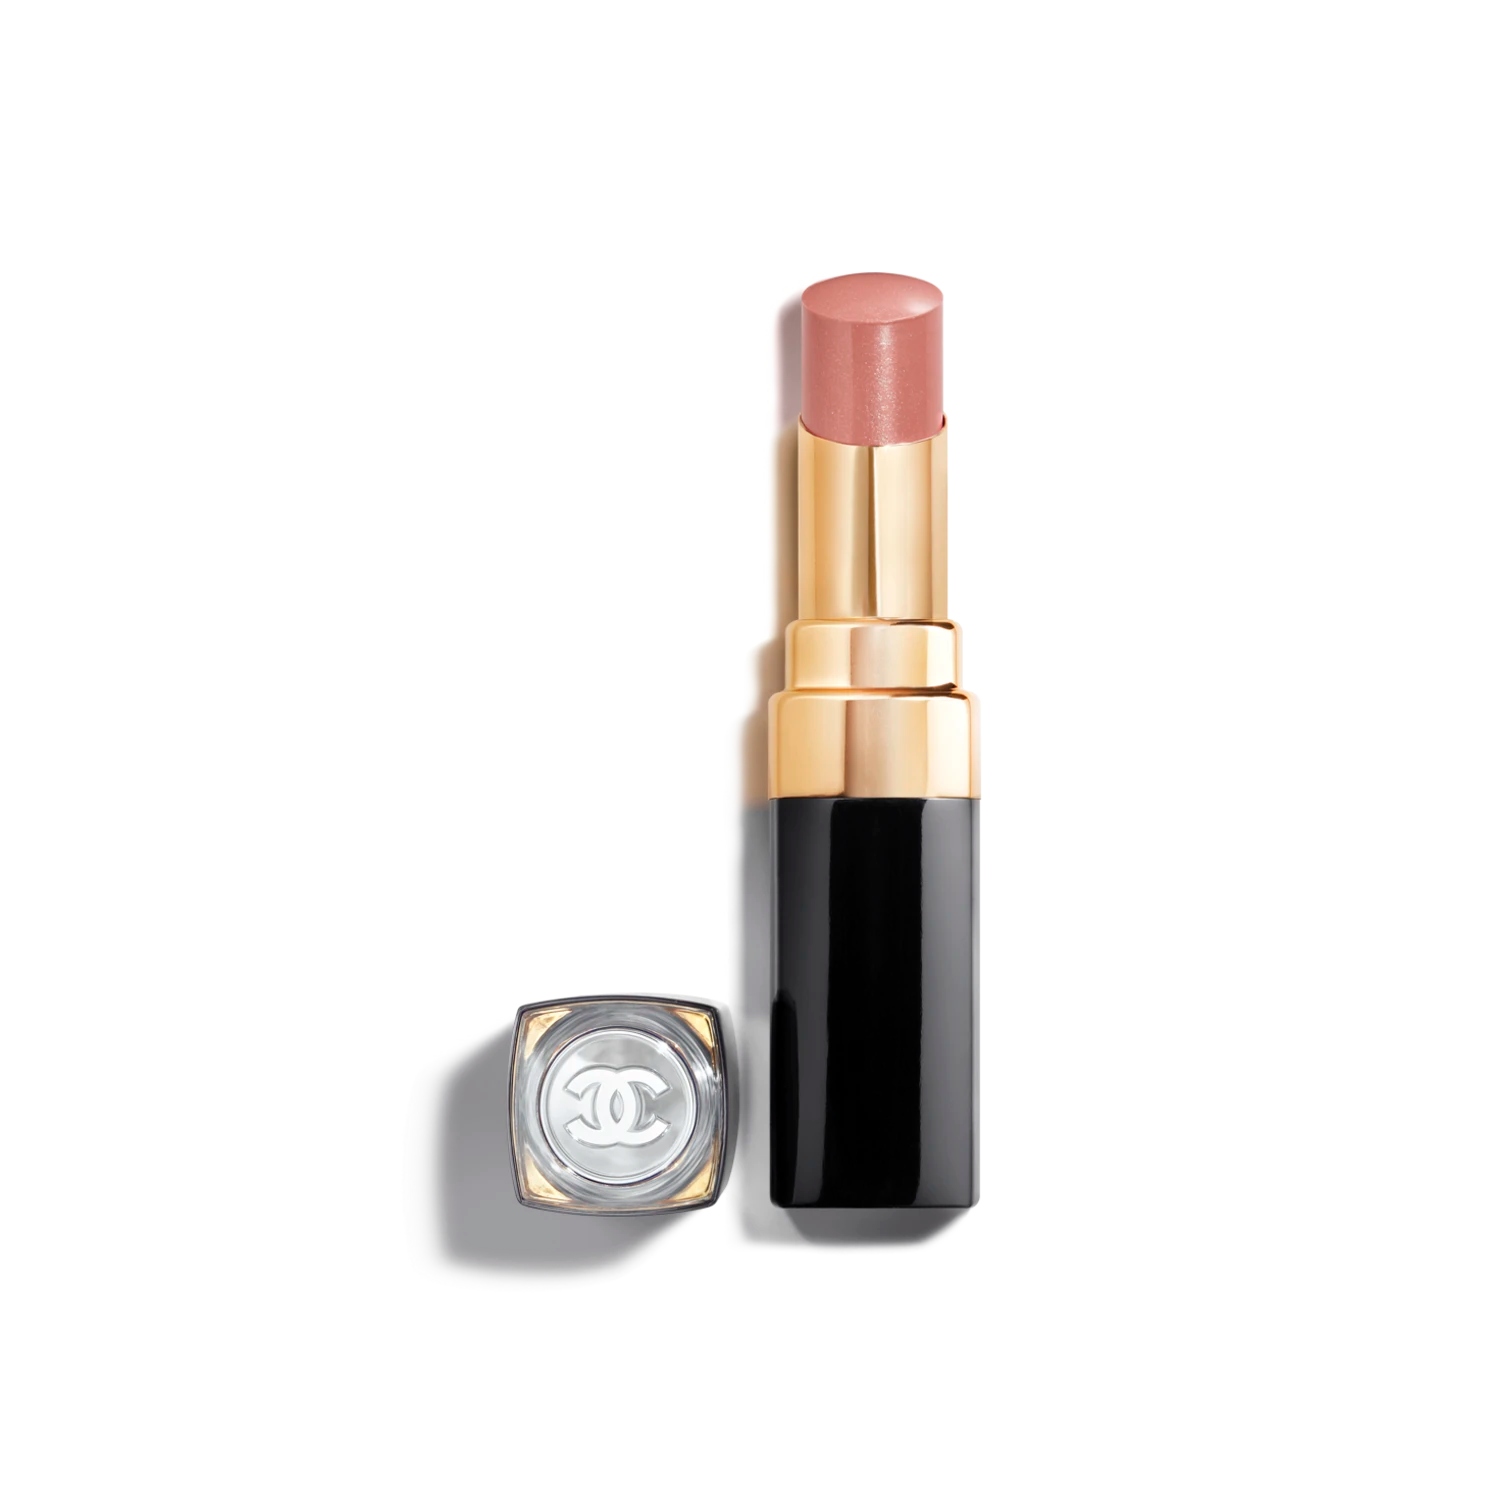 An Old Favourite - Chanel Rouge Noir - Get Lippie